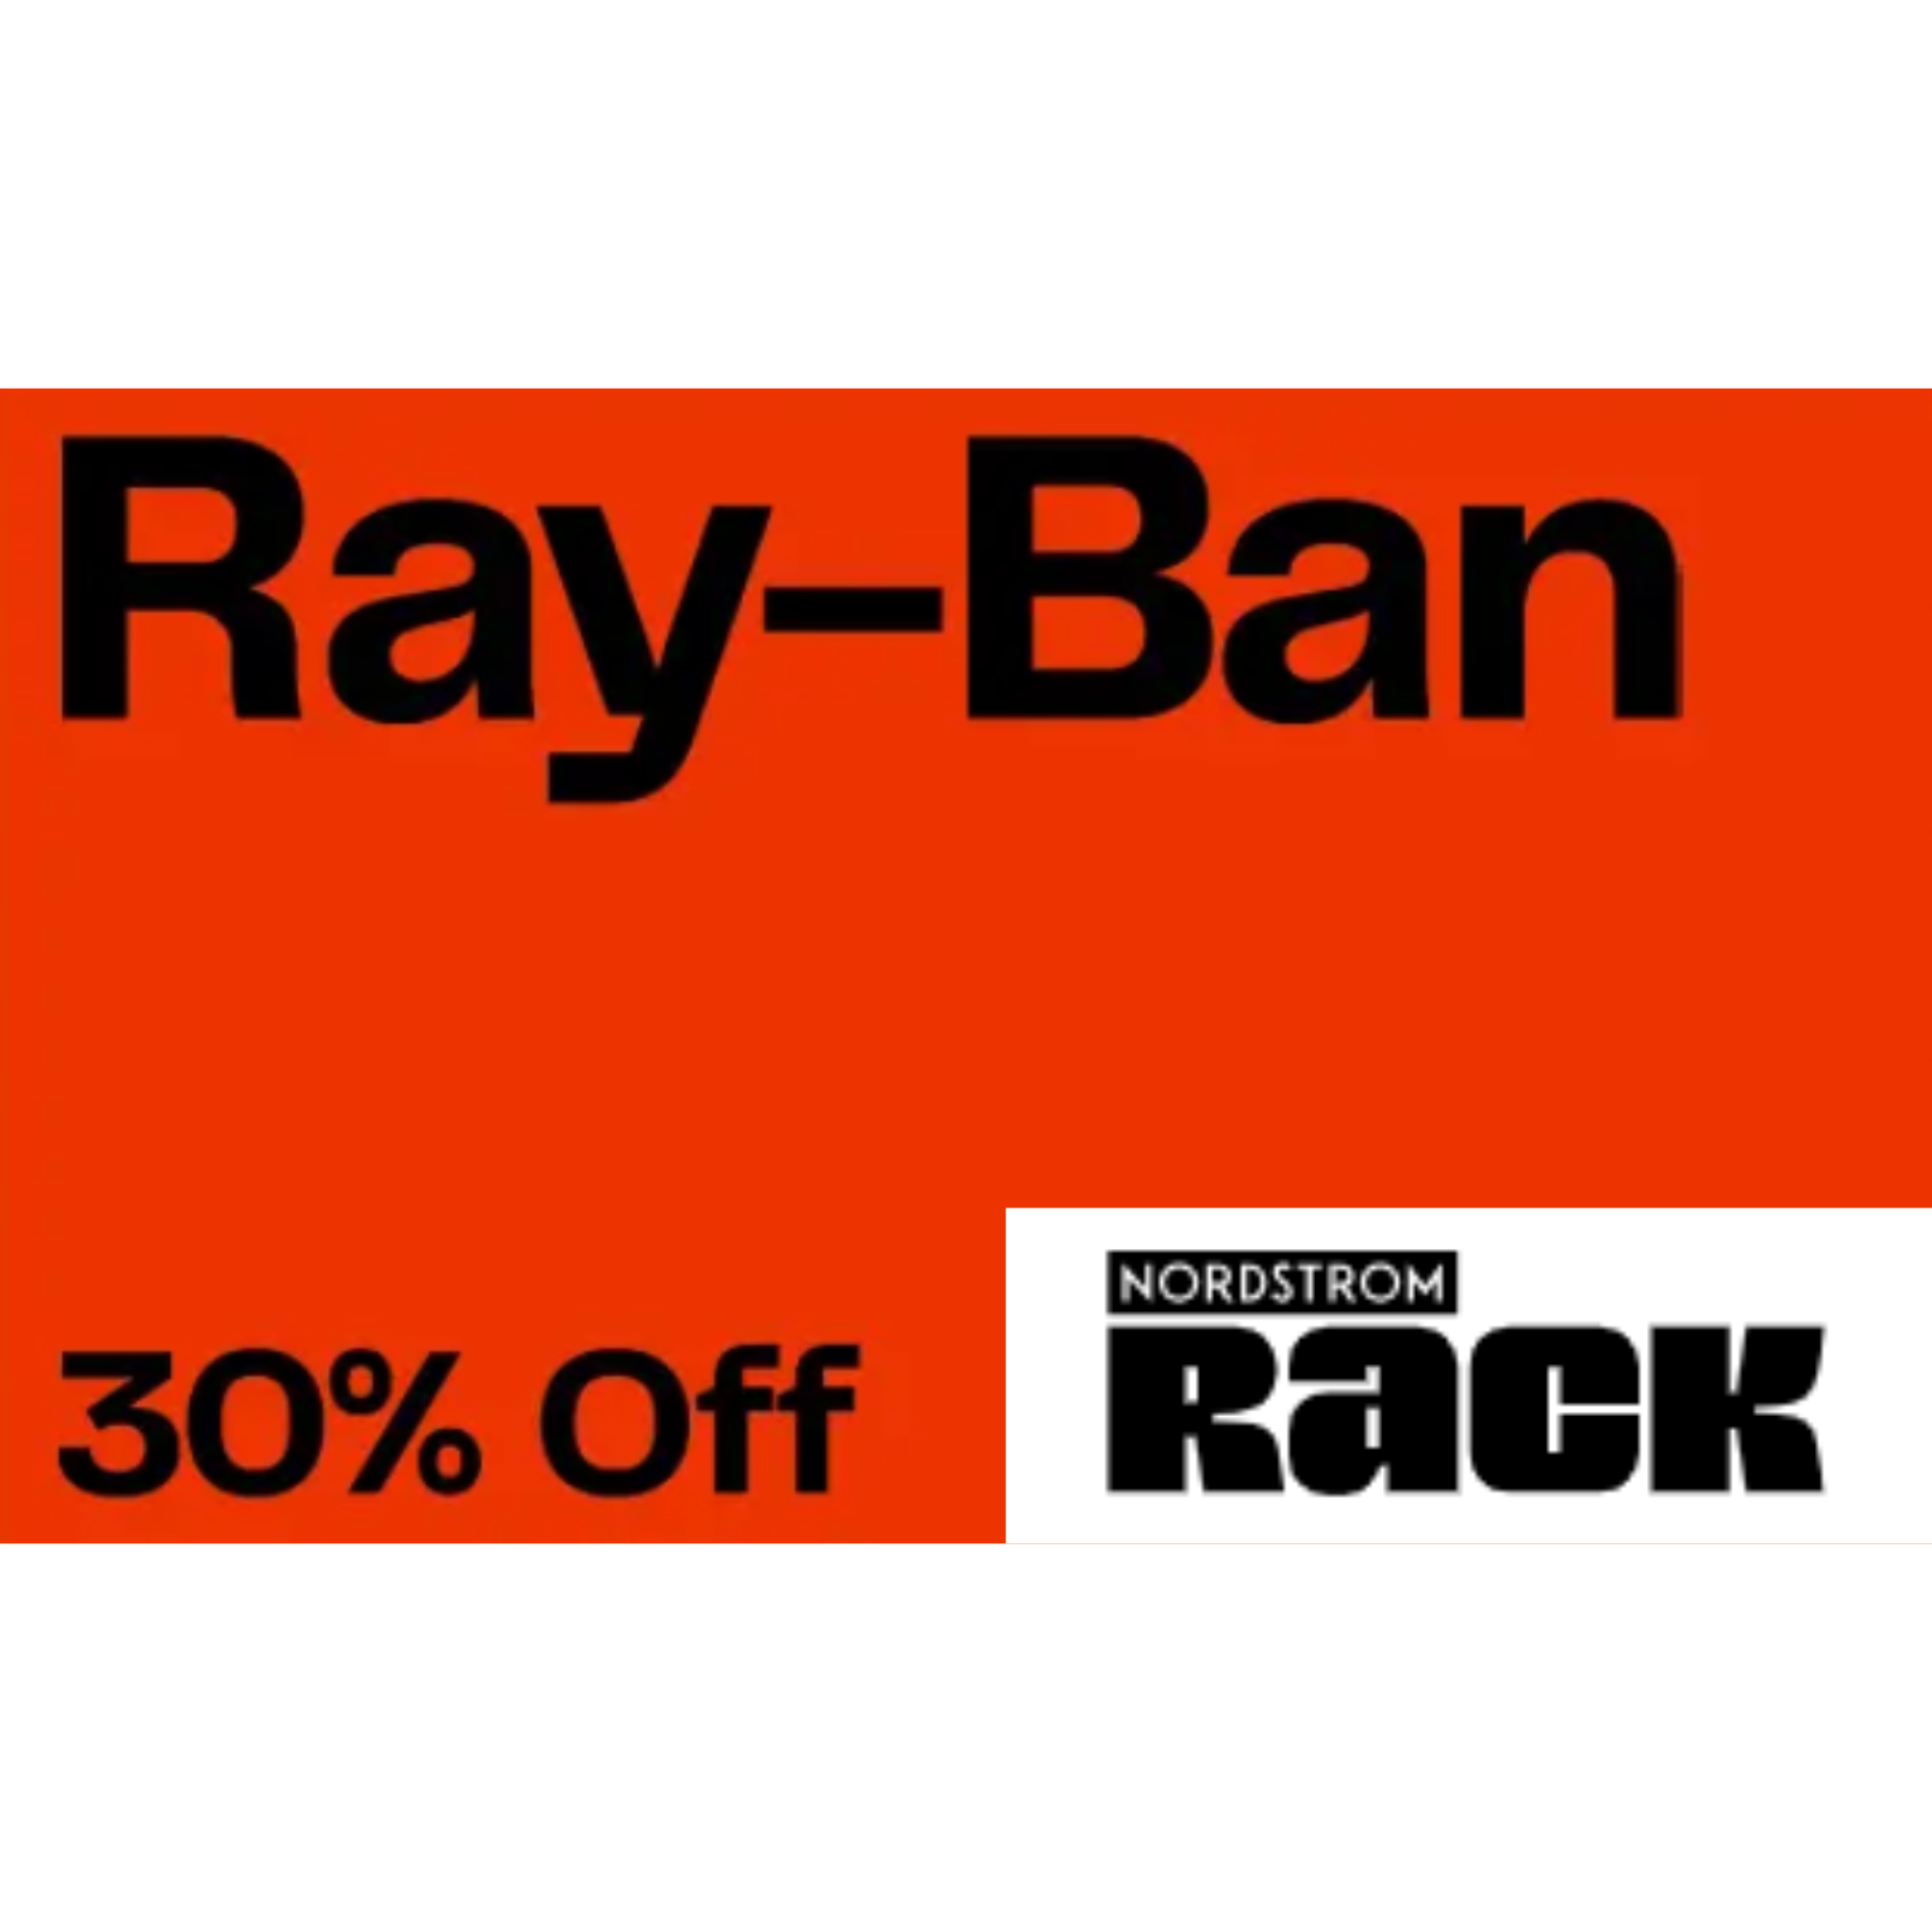 Ray - Ban 30% OFF EVERYTHING!